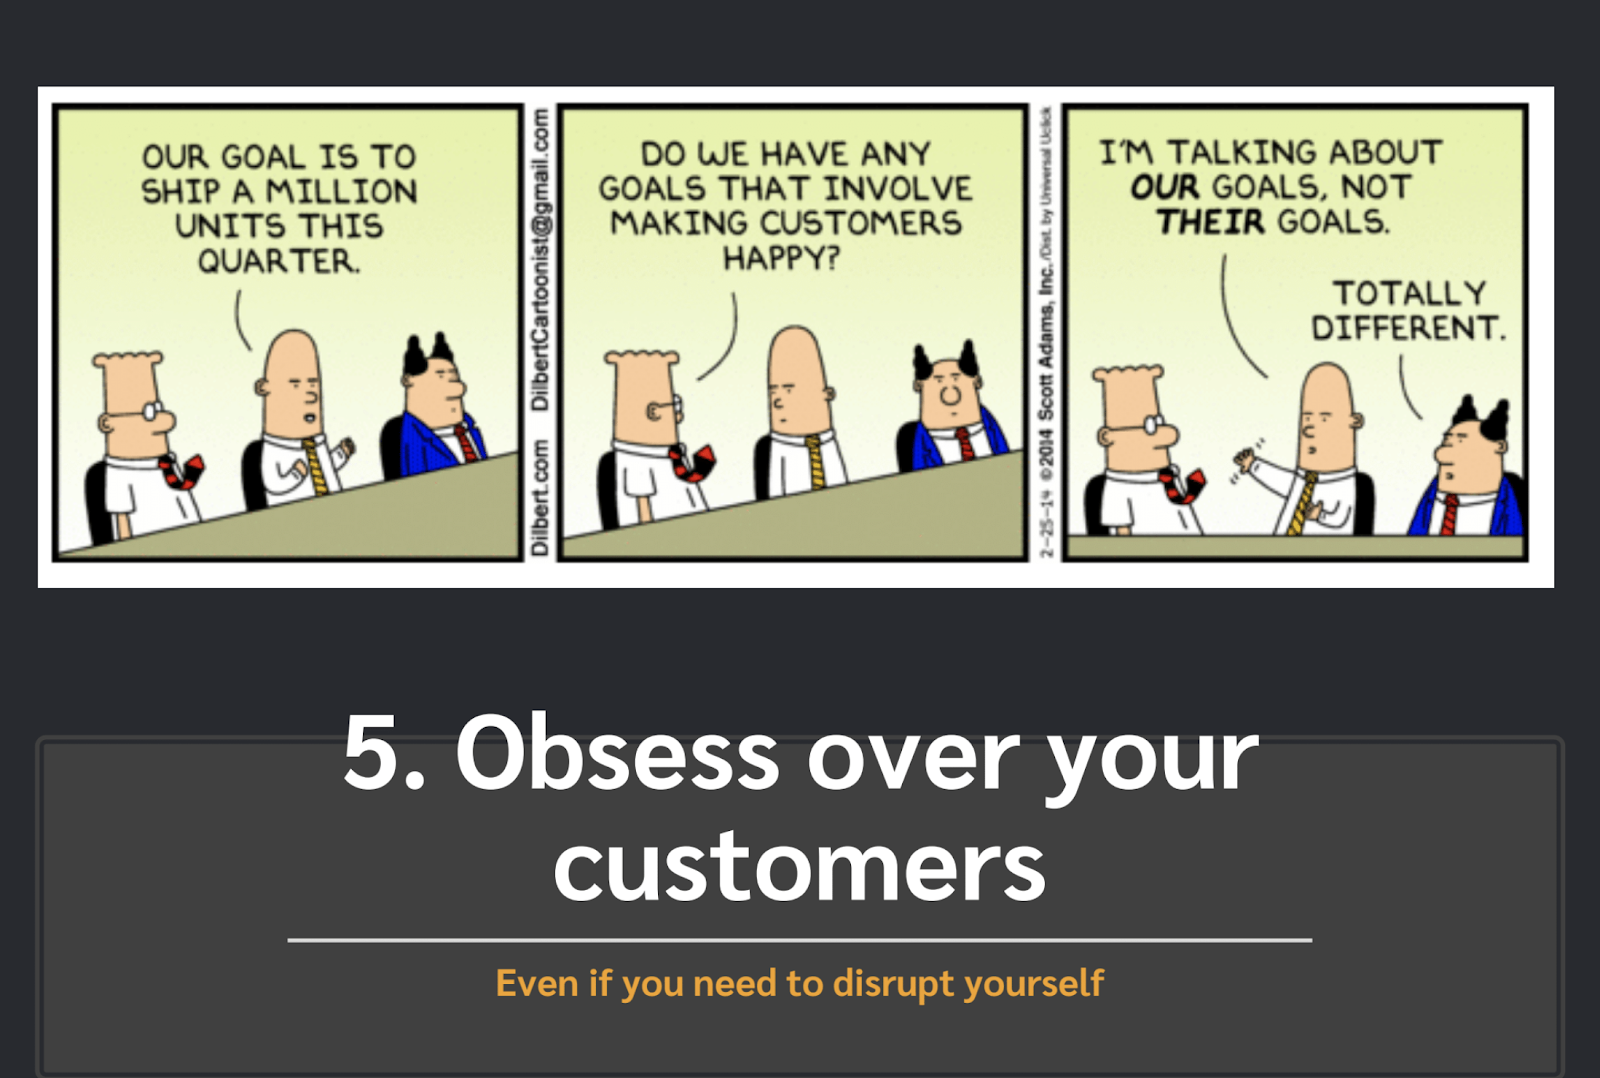 Obsess over your customers, even if you need to disrupt yourself.